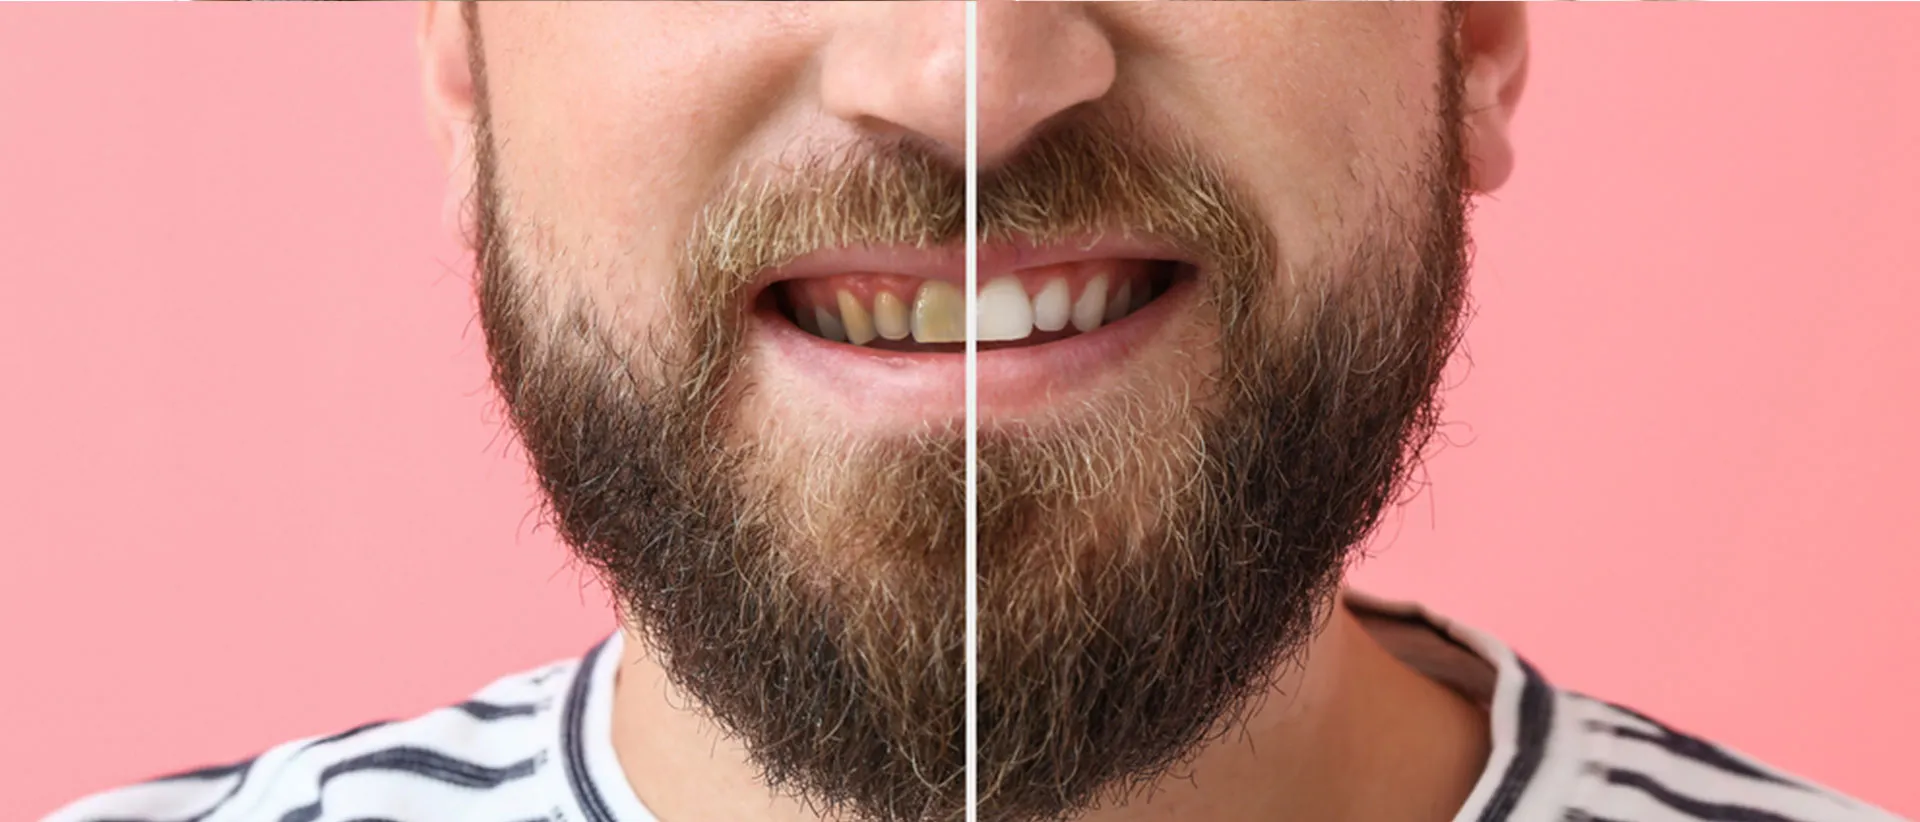 Man’s face before and after teeth scaling and polishing
